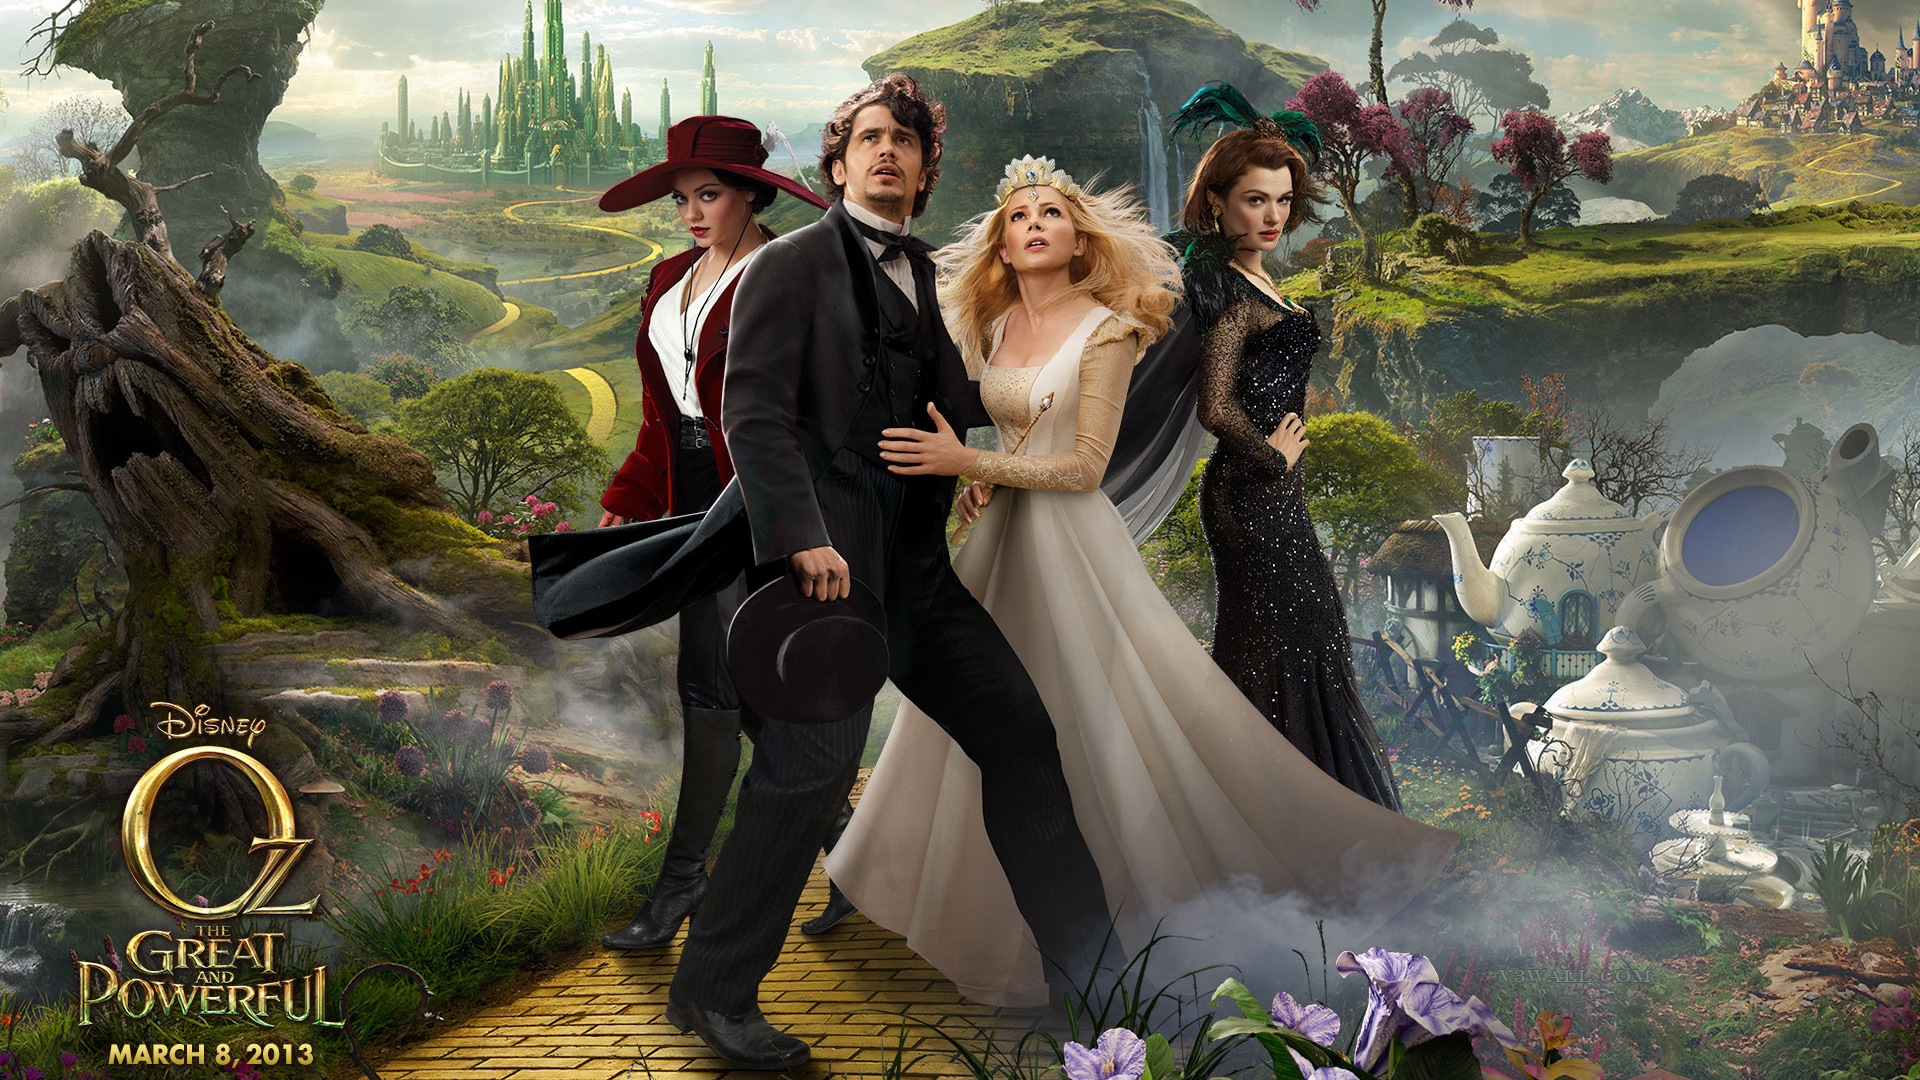 Oz The Great and Powerful 绿野仙踪 高清壁纸1 - 1920x1080